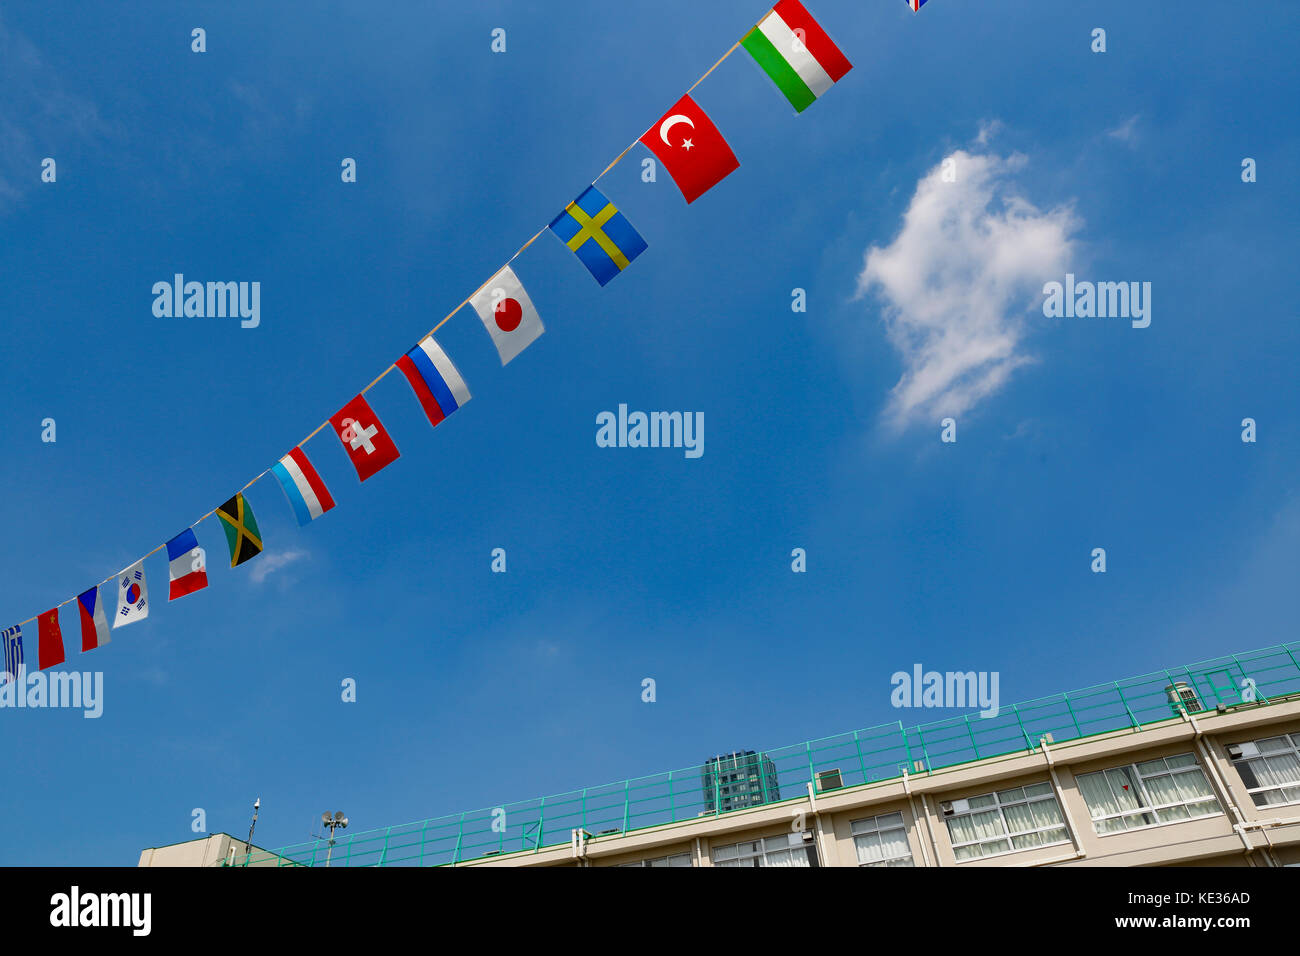 National flags at elementary school Stock Photo